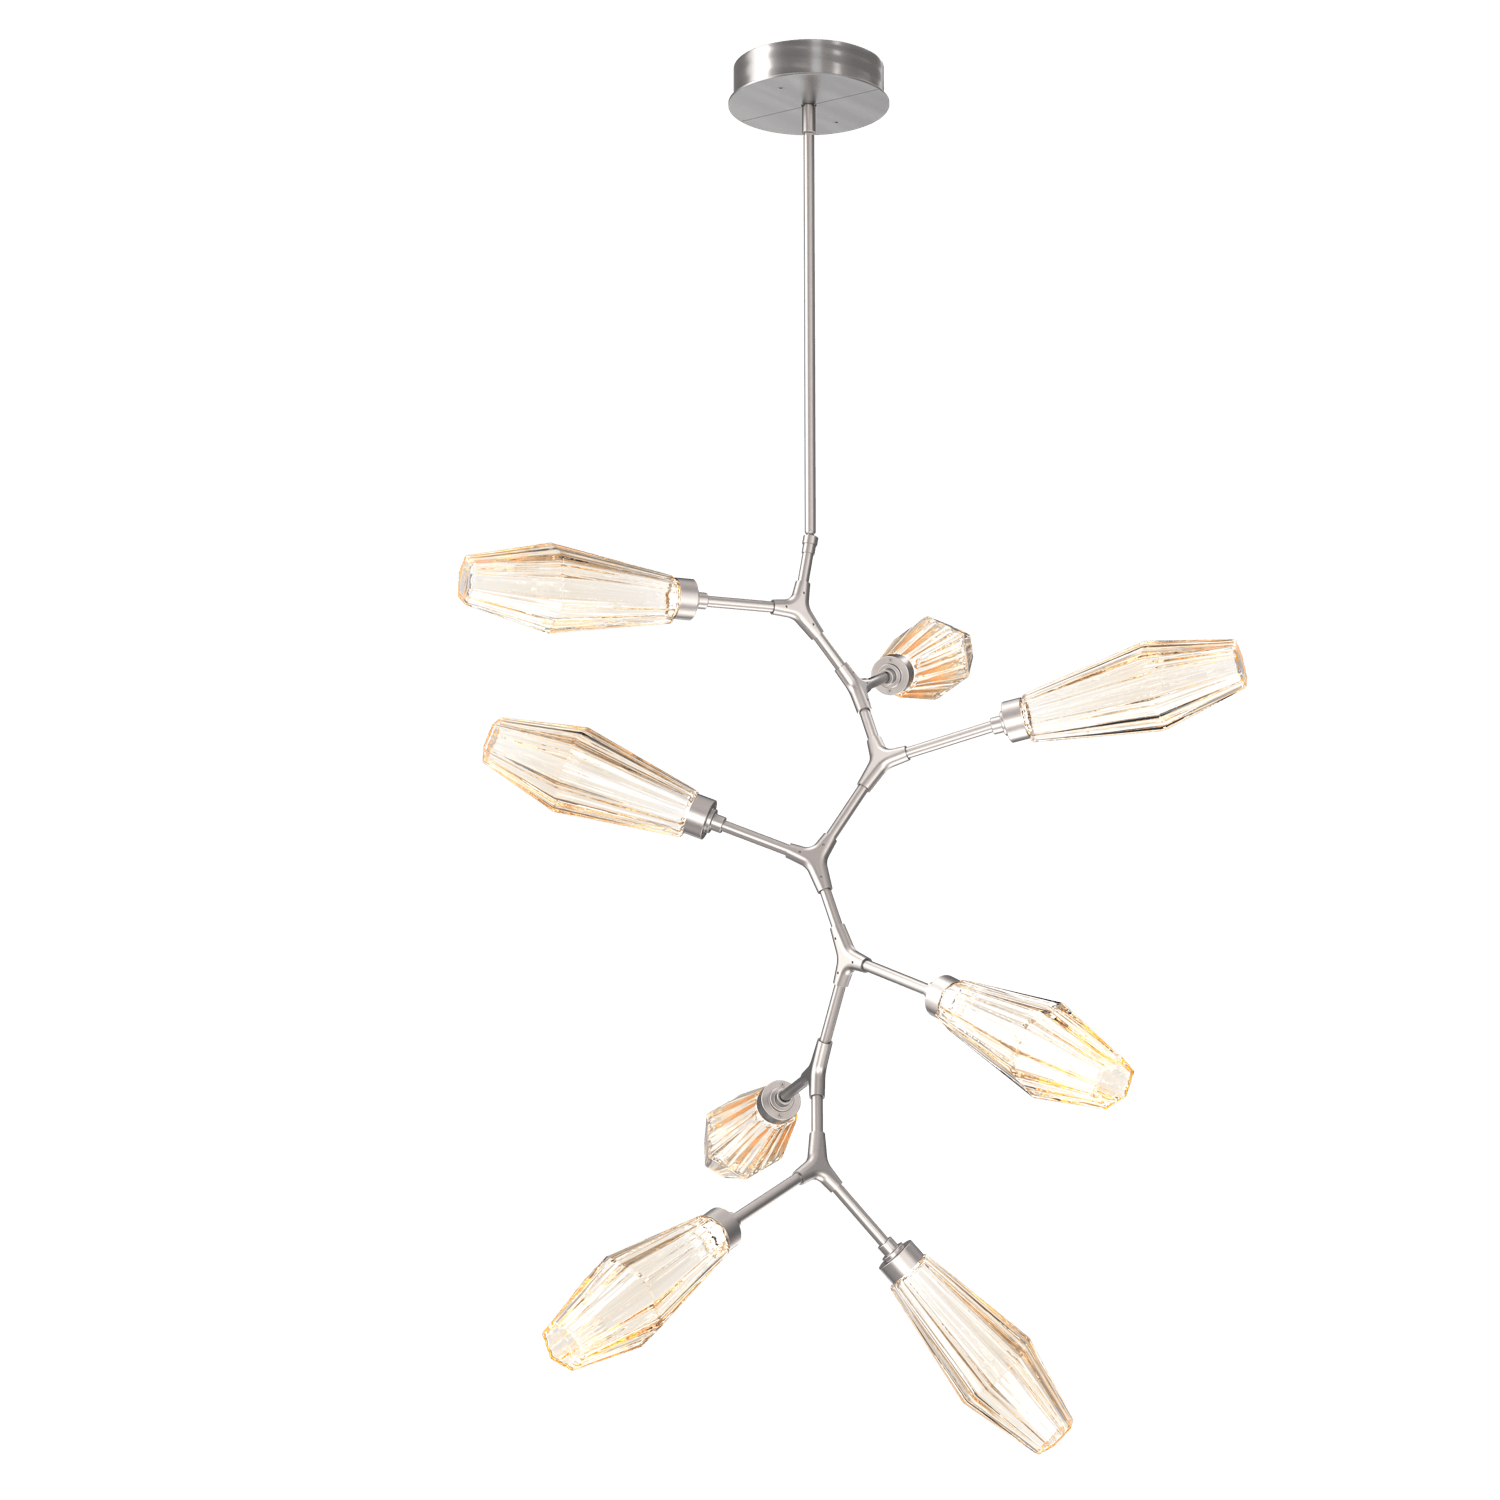 CHB0049-VB-SN-RA-Hammerton-Studio-Aalto-8-light-modern-vine-chandelier-with-satin-nickel-finish-and-optic-ribbed-amber-glass-shades-and-LED-lamping